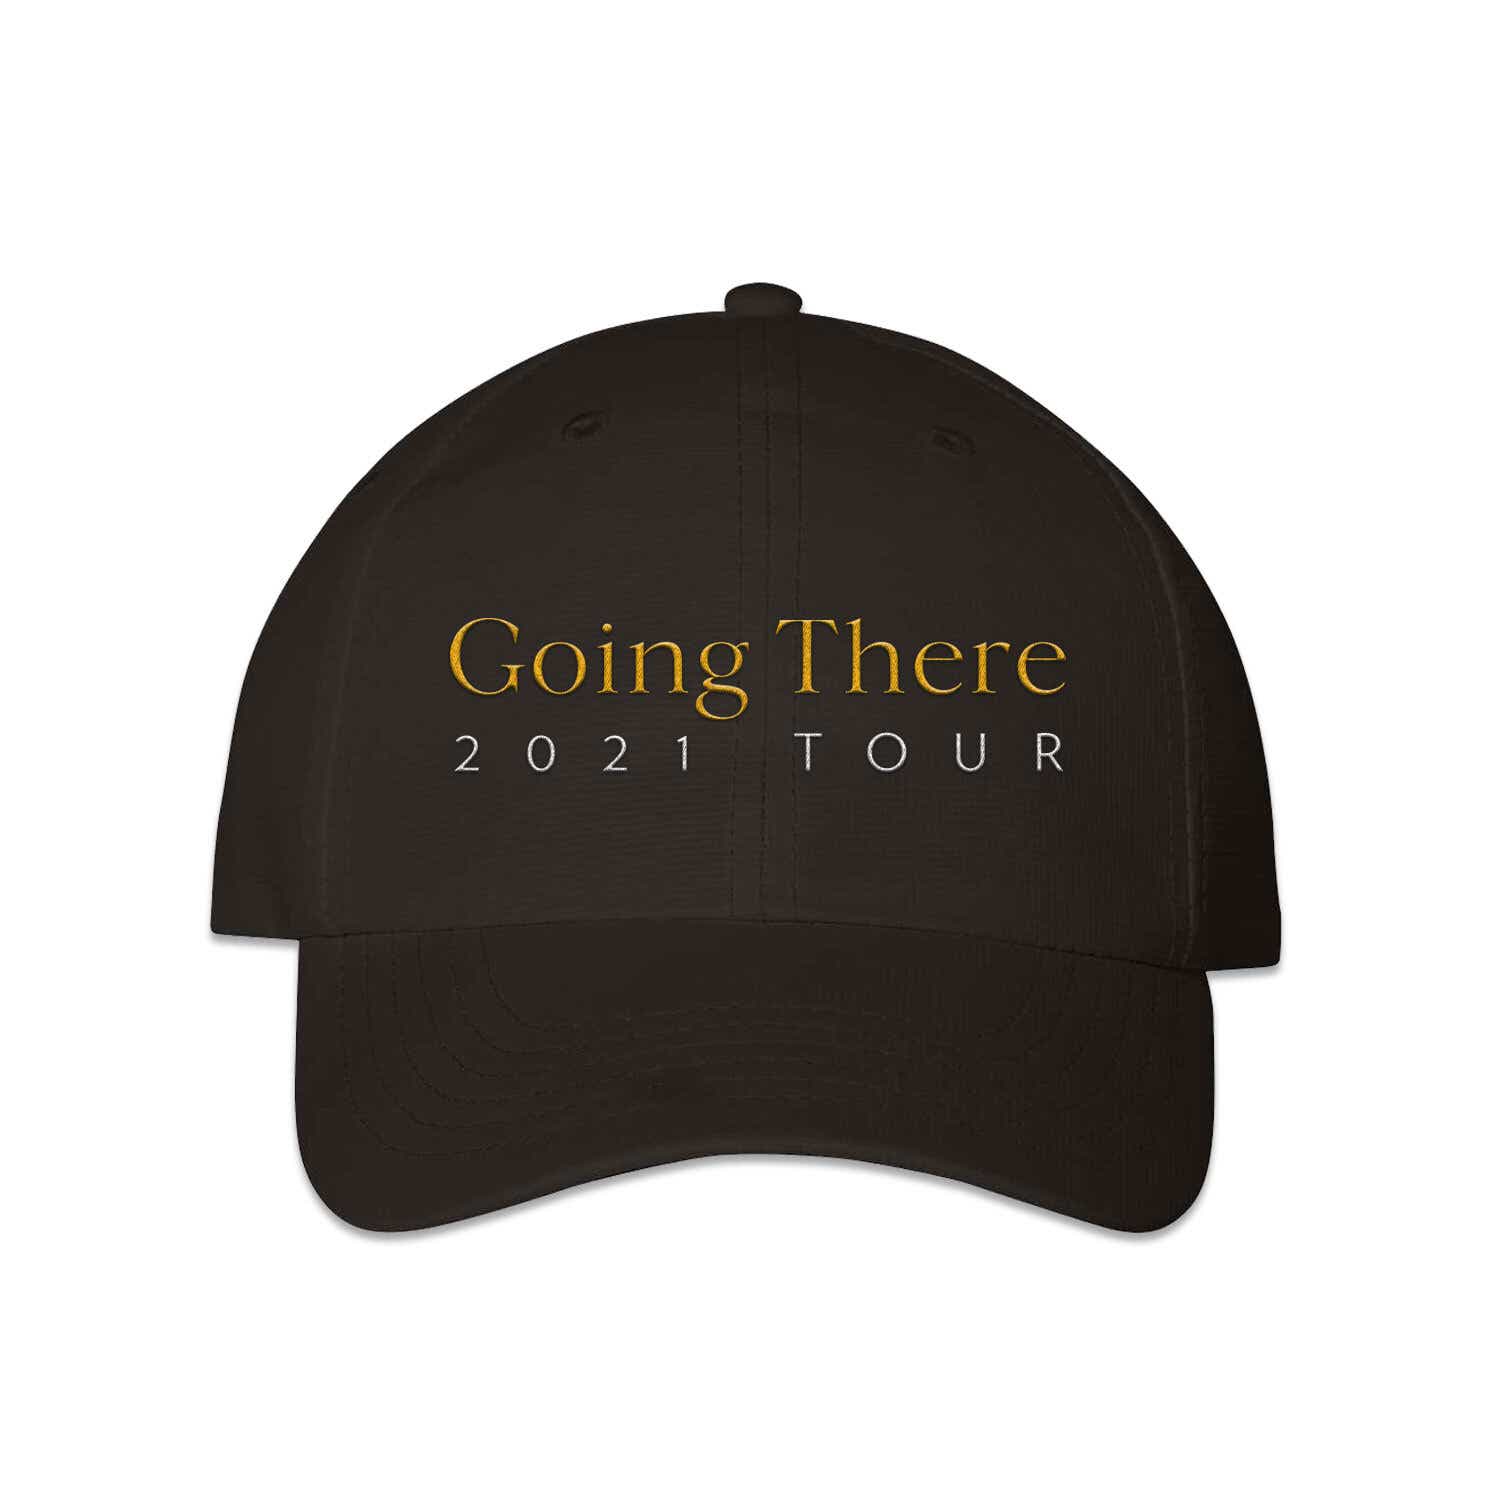 Going There Tour black golf hat